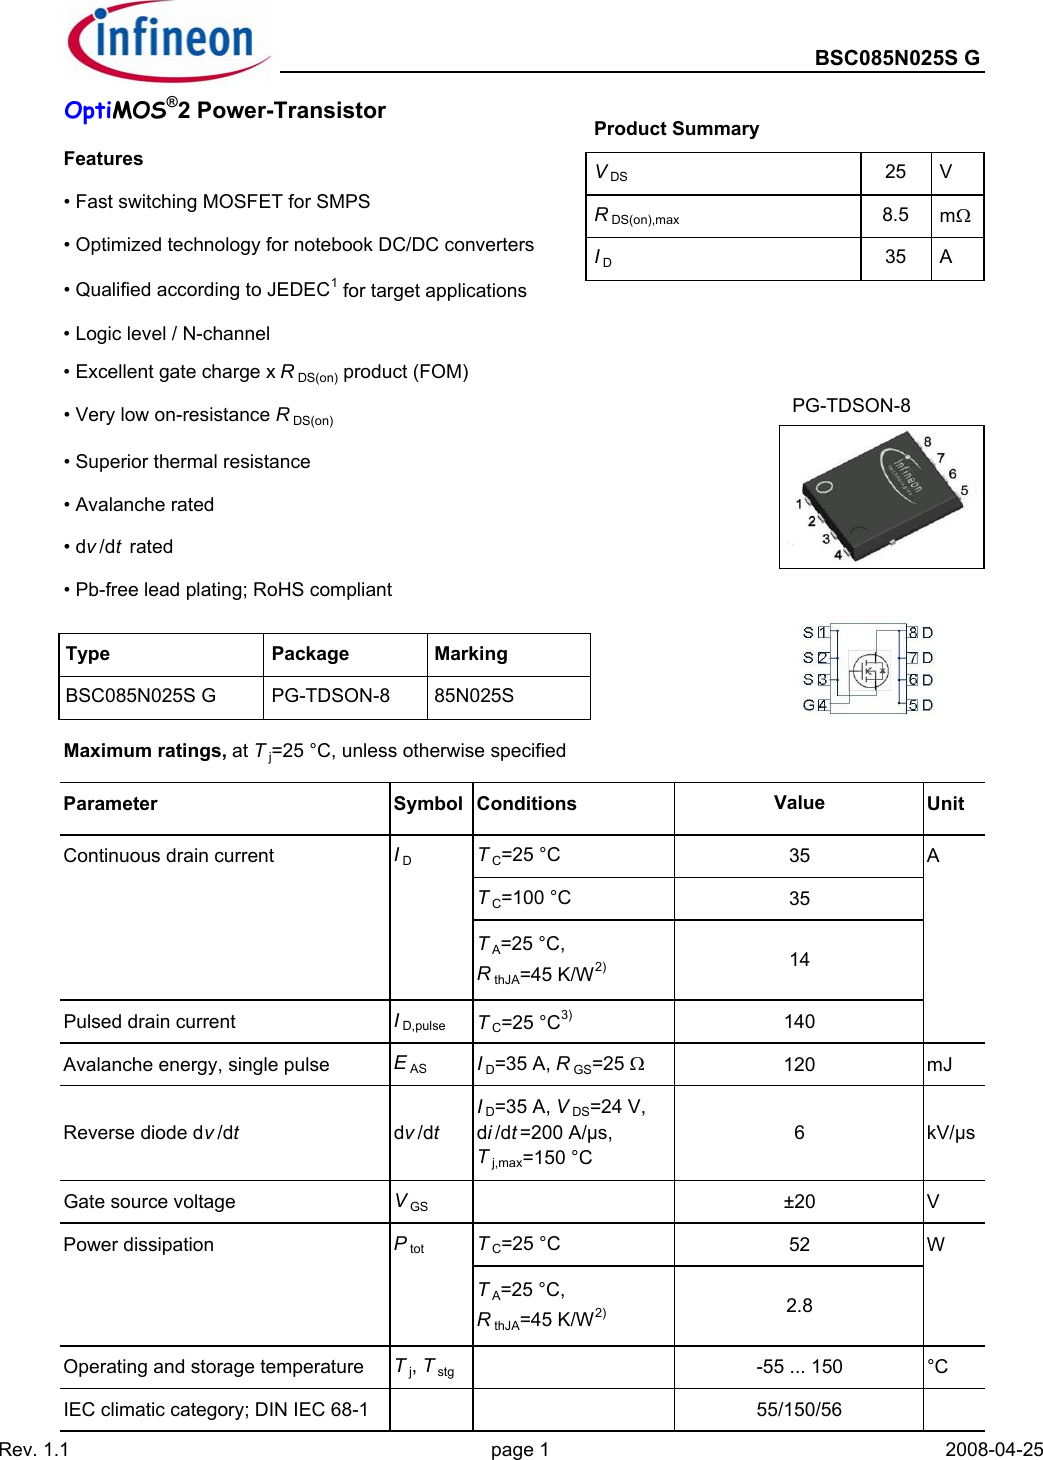 Page 1 of 11 - BSC085N025S G - Datasheet. Www.s-manuals.com. Bsc085n025sg Infineon